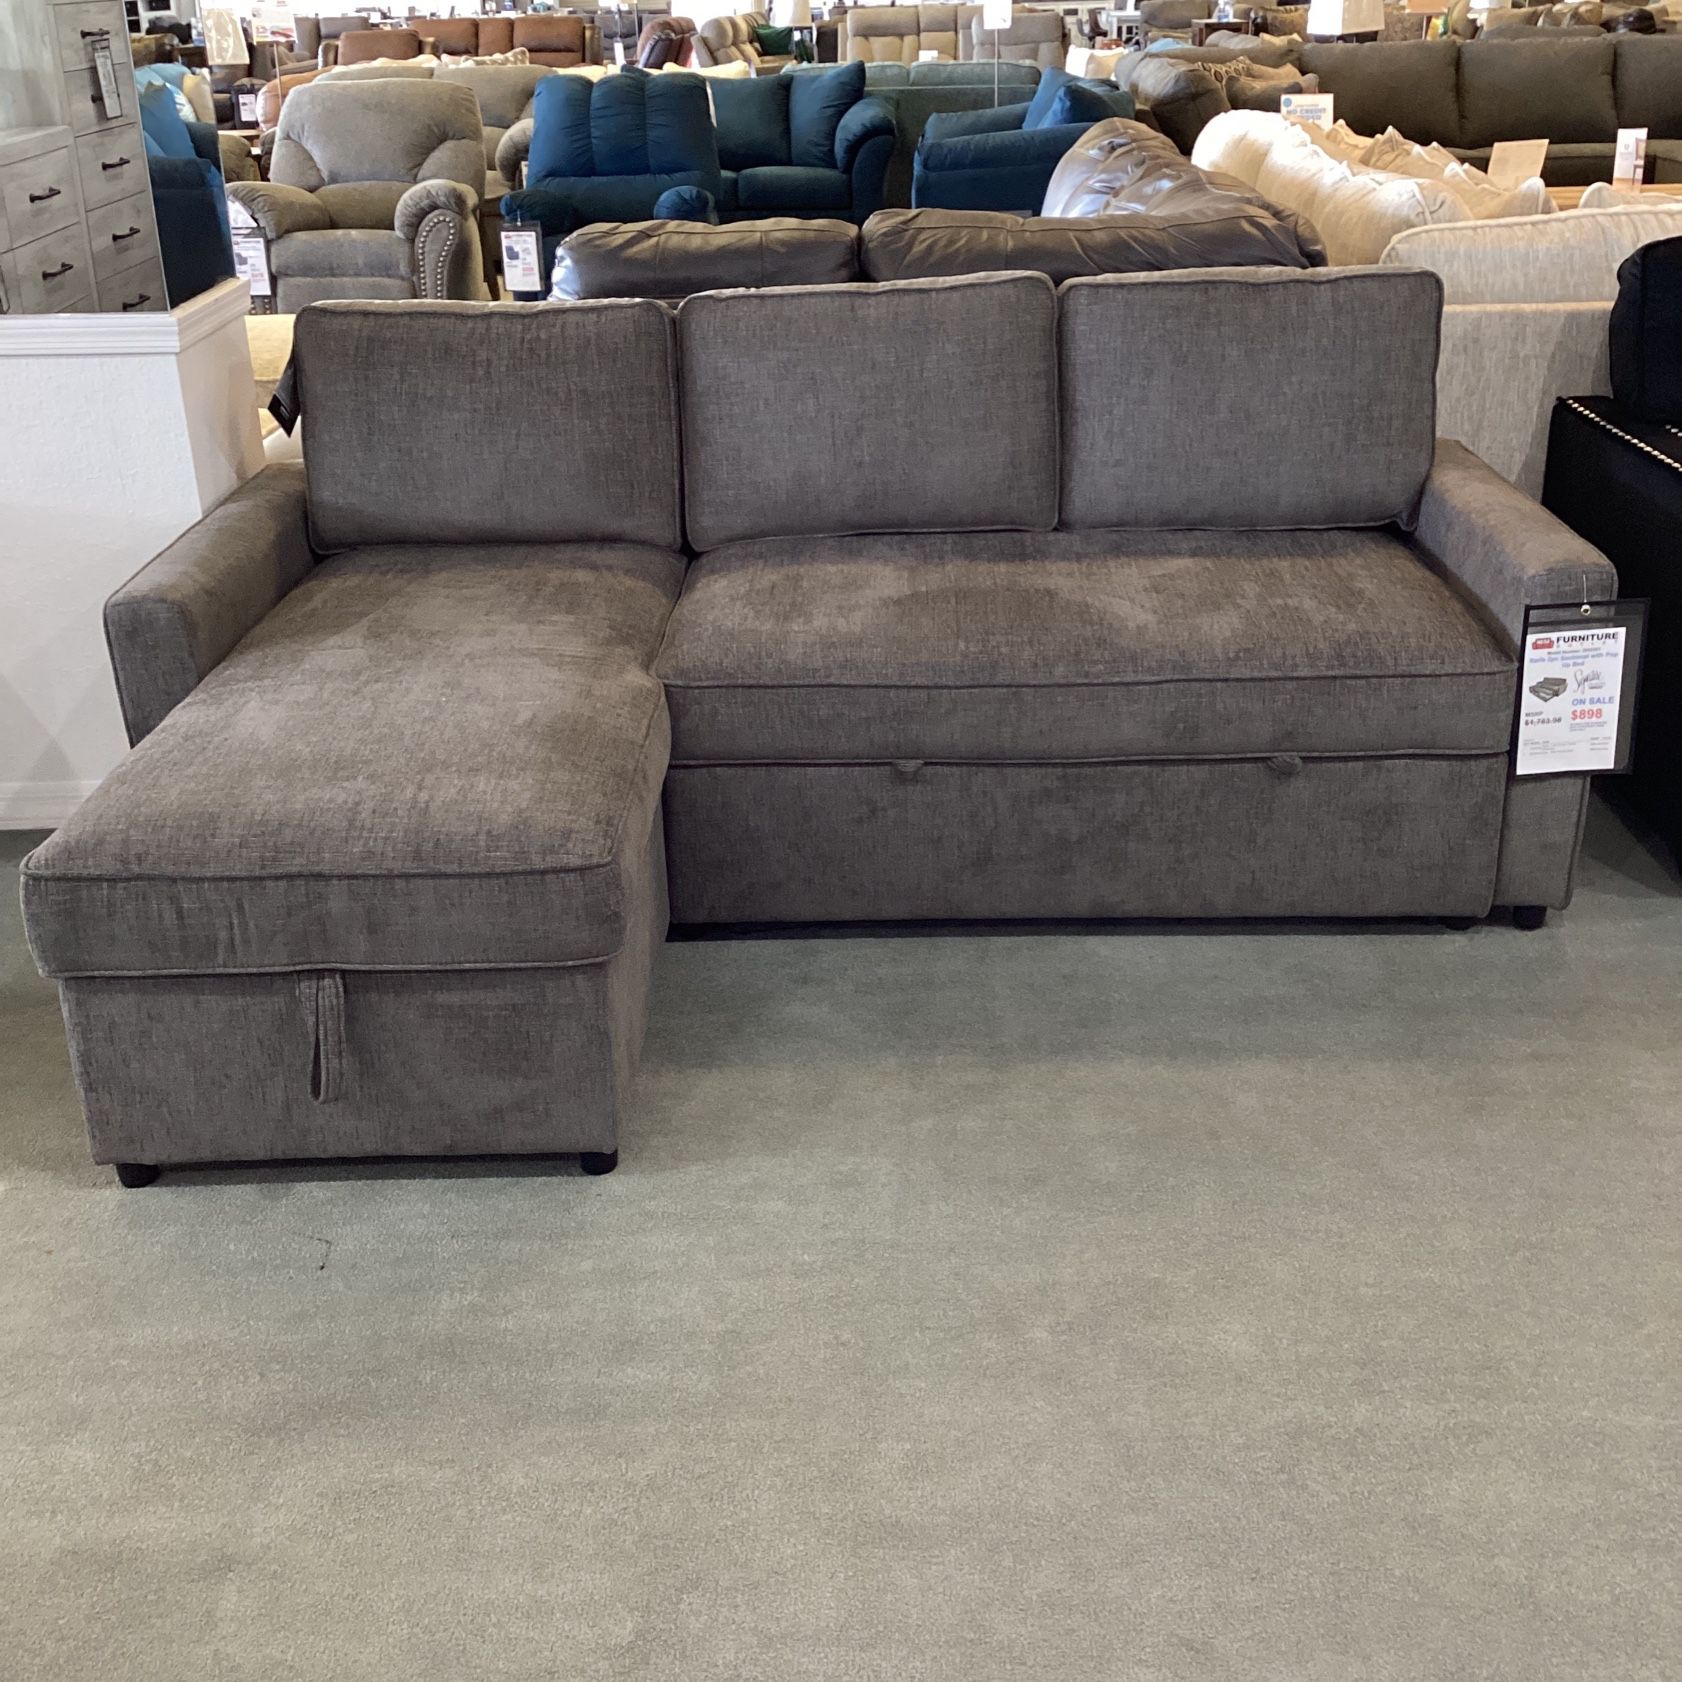 Kerle 2pc Sectional With Pop Up Bed